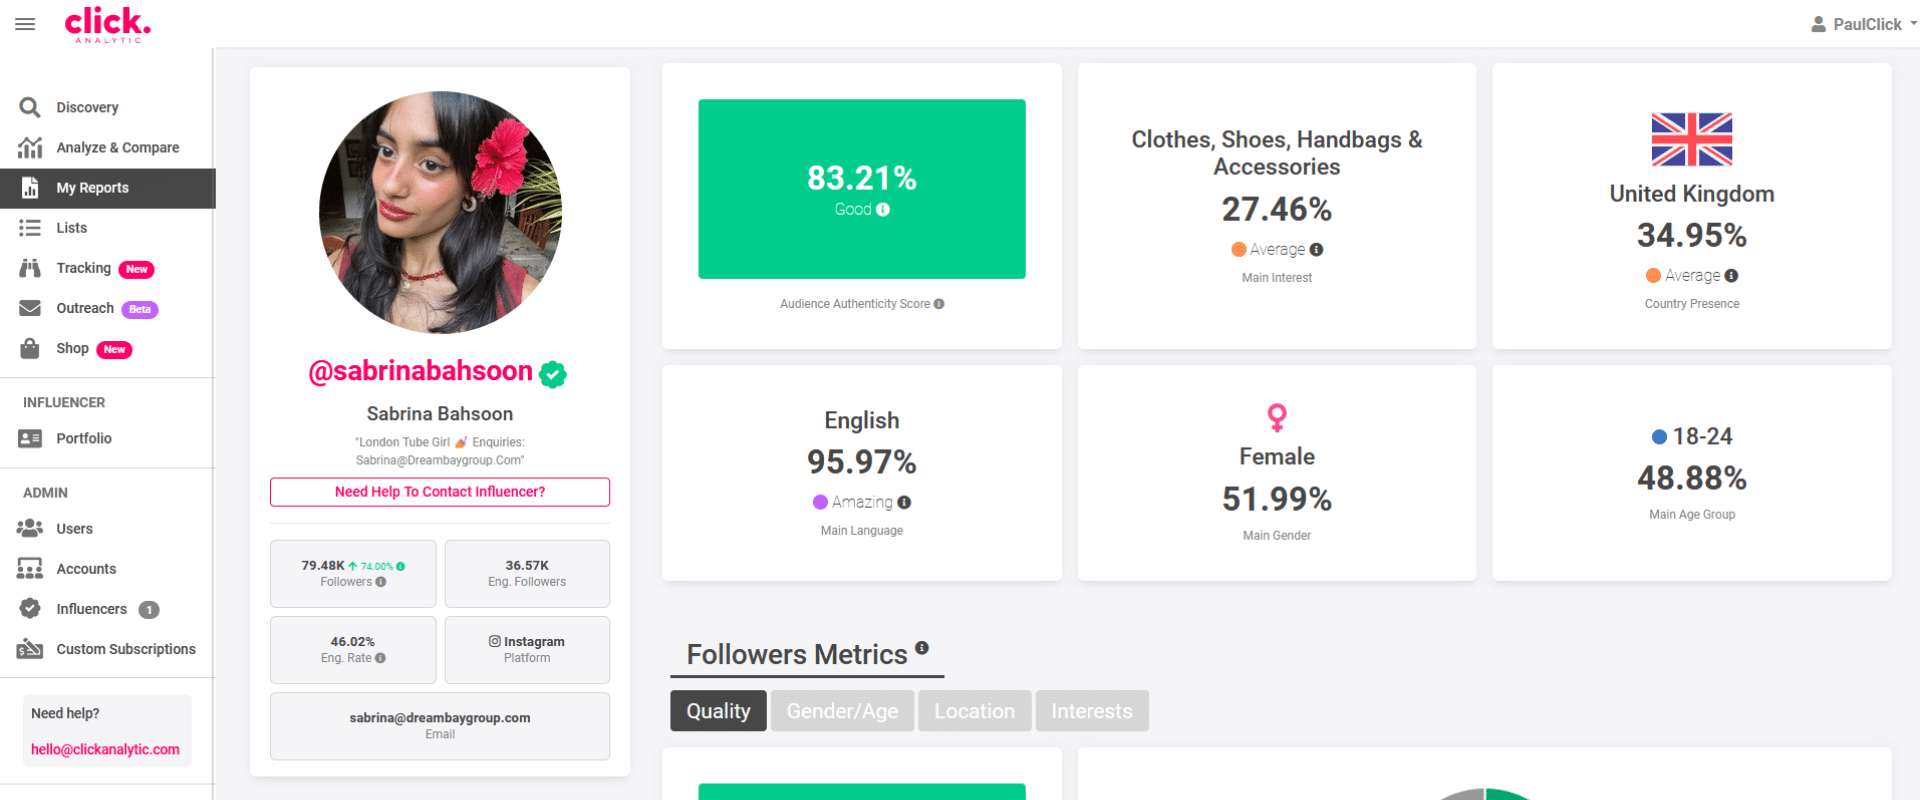 Screenshot of a social media analytics dashboard featuring user "sabrinabhasoon" with demographics, engagement metrics, and a picture of a smiling woman with flowers in her hair.